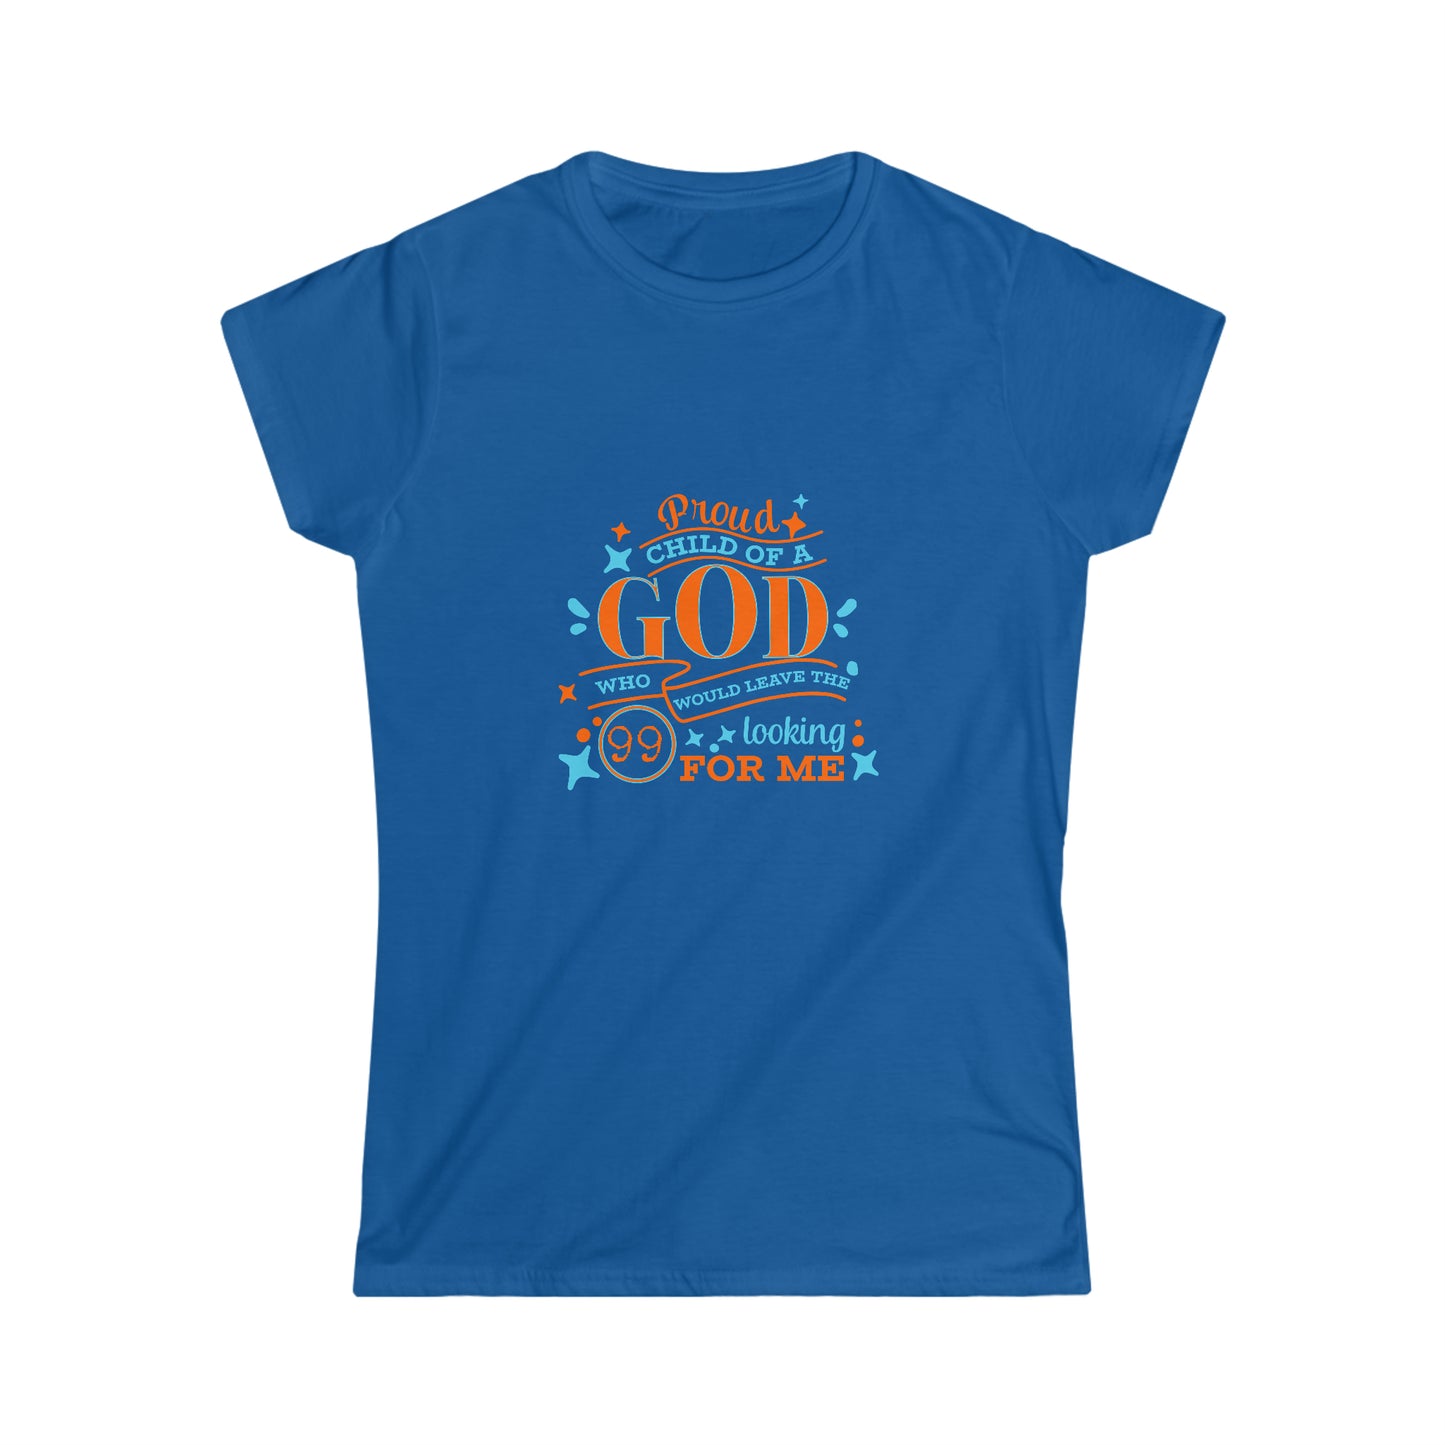 Proud Child Of A God Who Would Leave the 99 Looking For Me Women's T-shirt